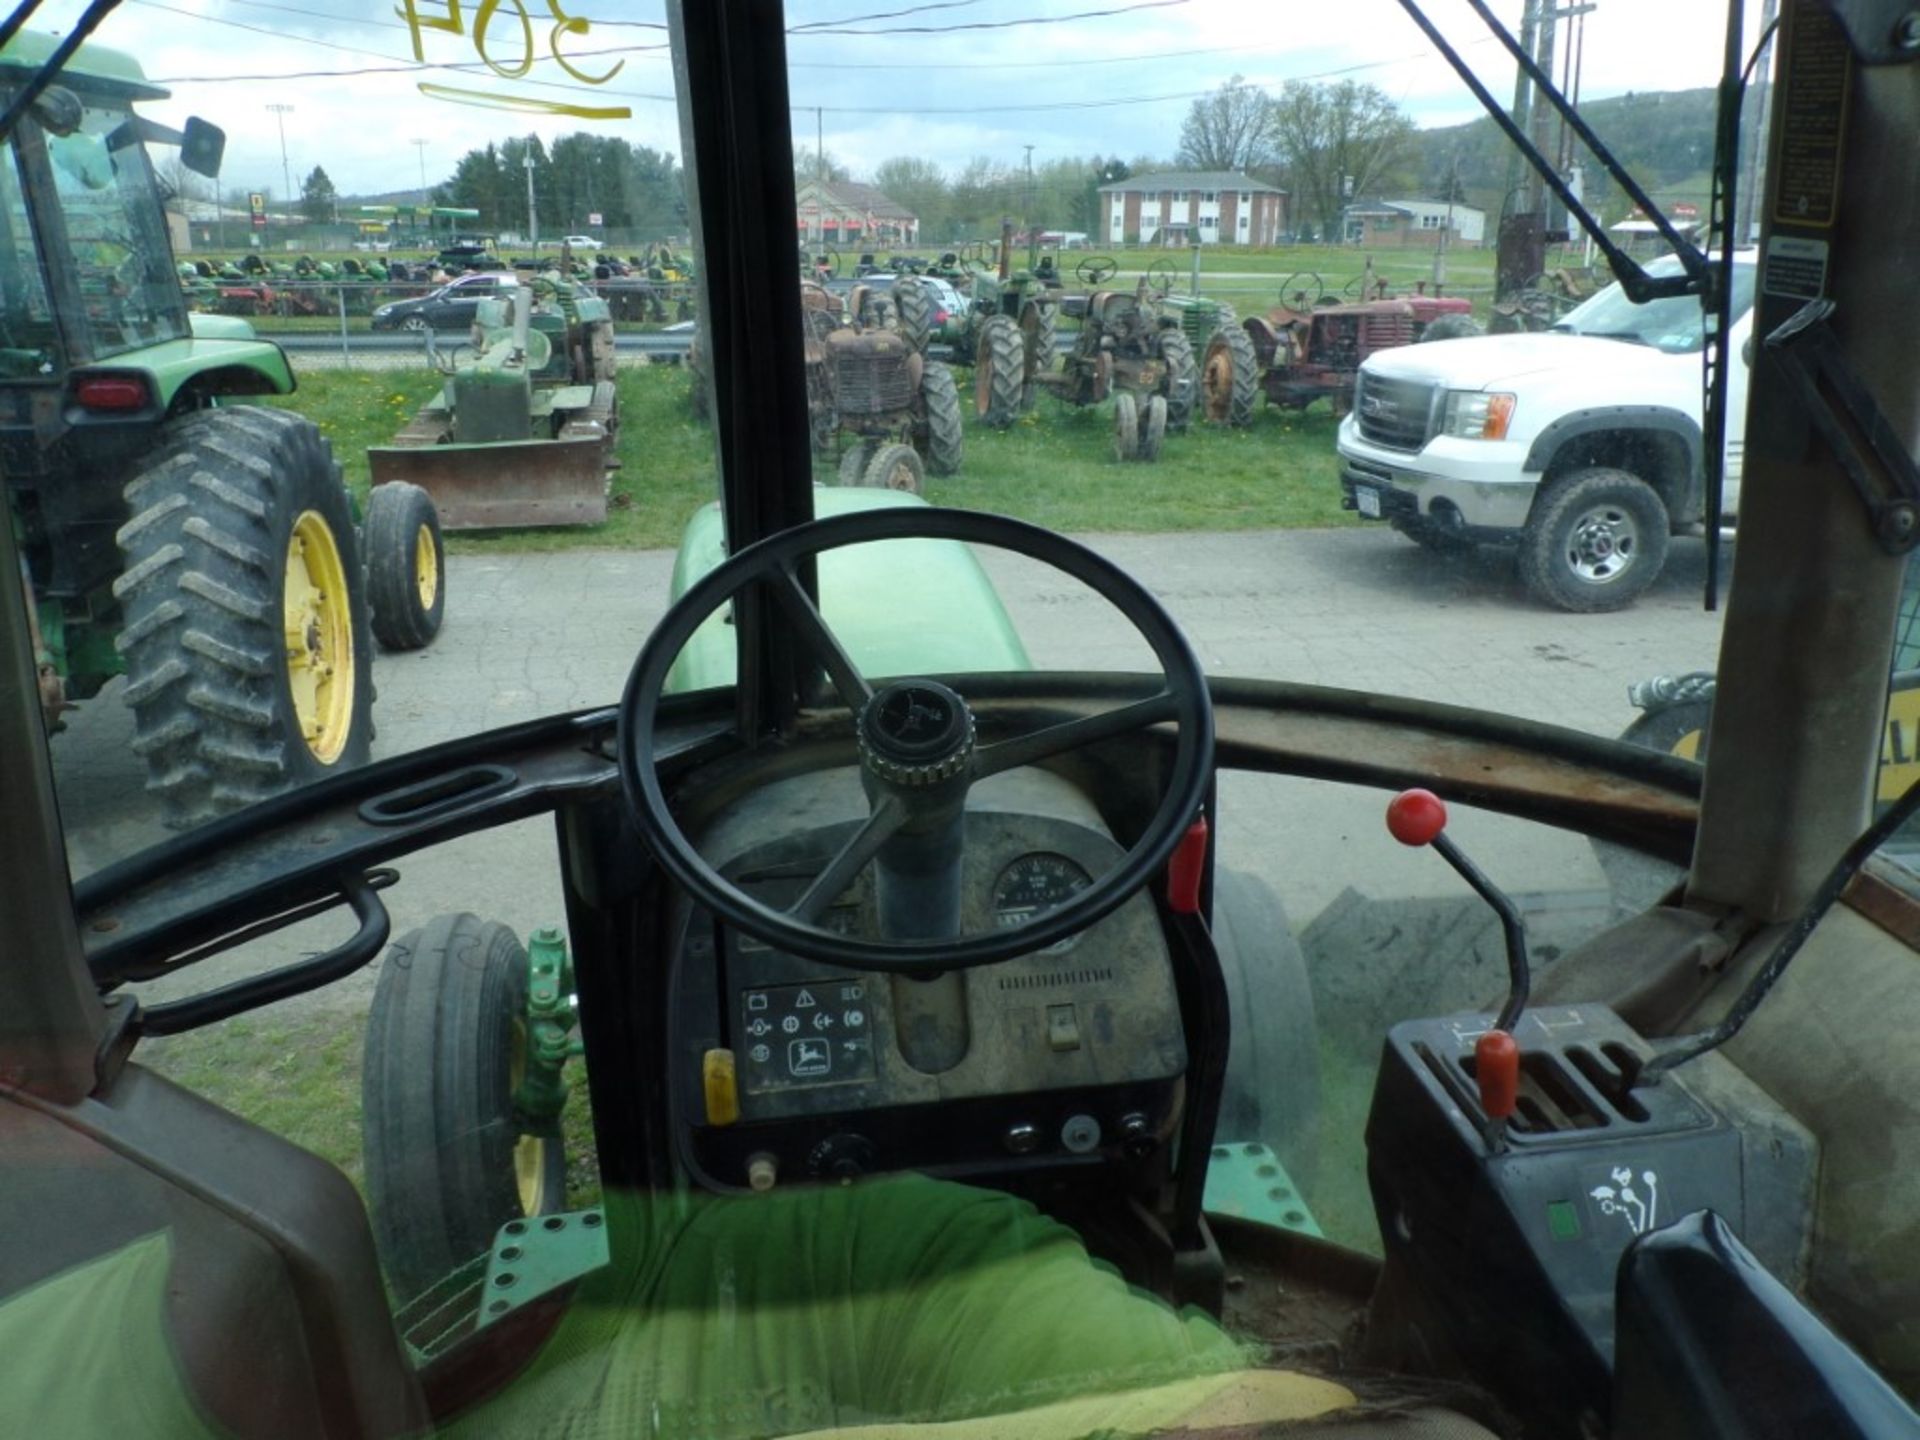 John Seere 2950 2 WD Full Cab, PtO, 3 PT Hitch, Dual Remotes, 3741 Hrs., Good Rubber (5335) - Image 4 of 4